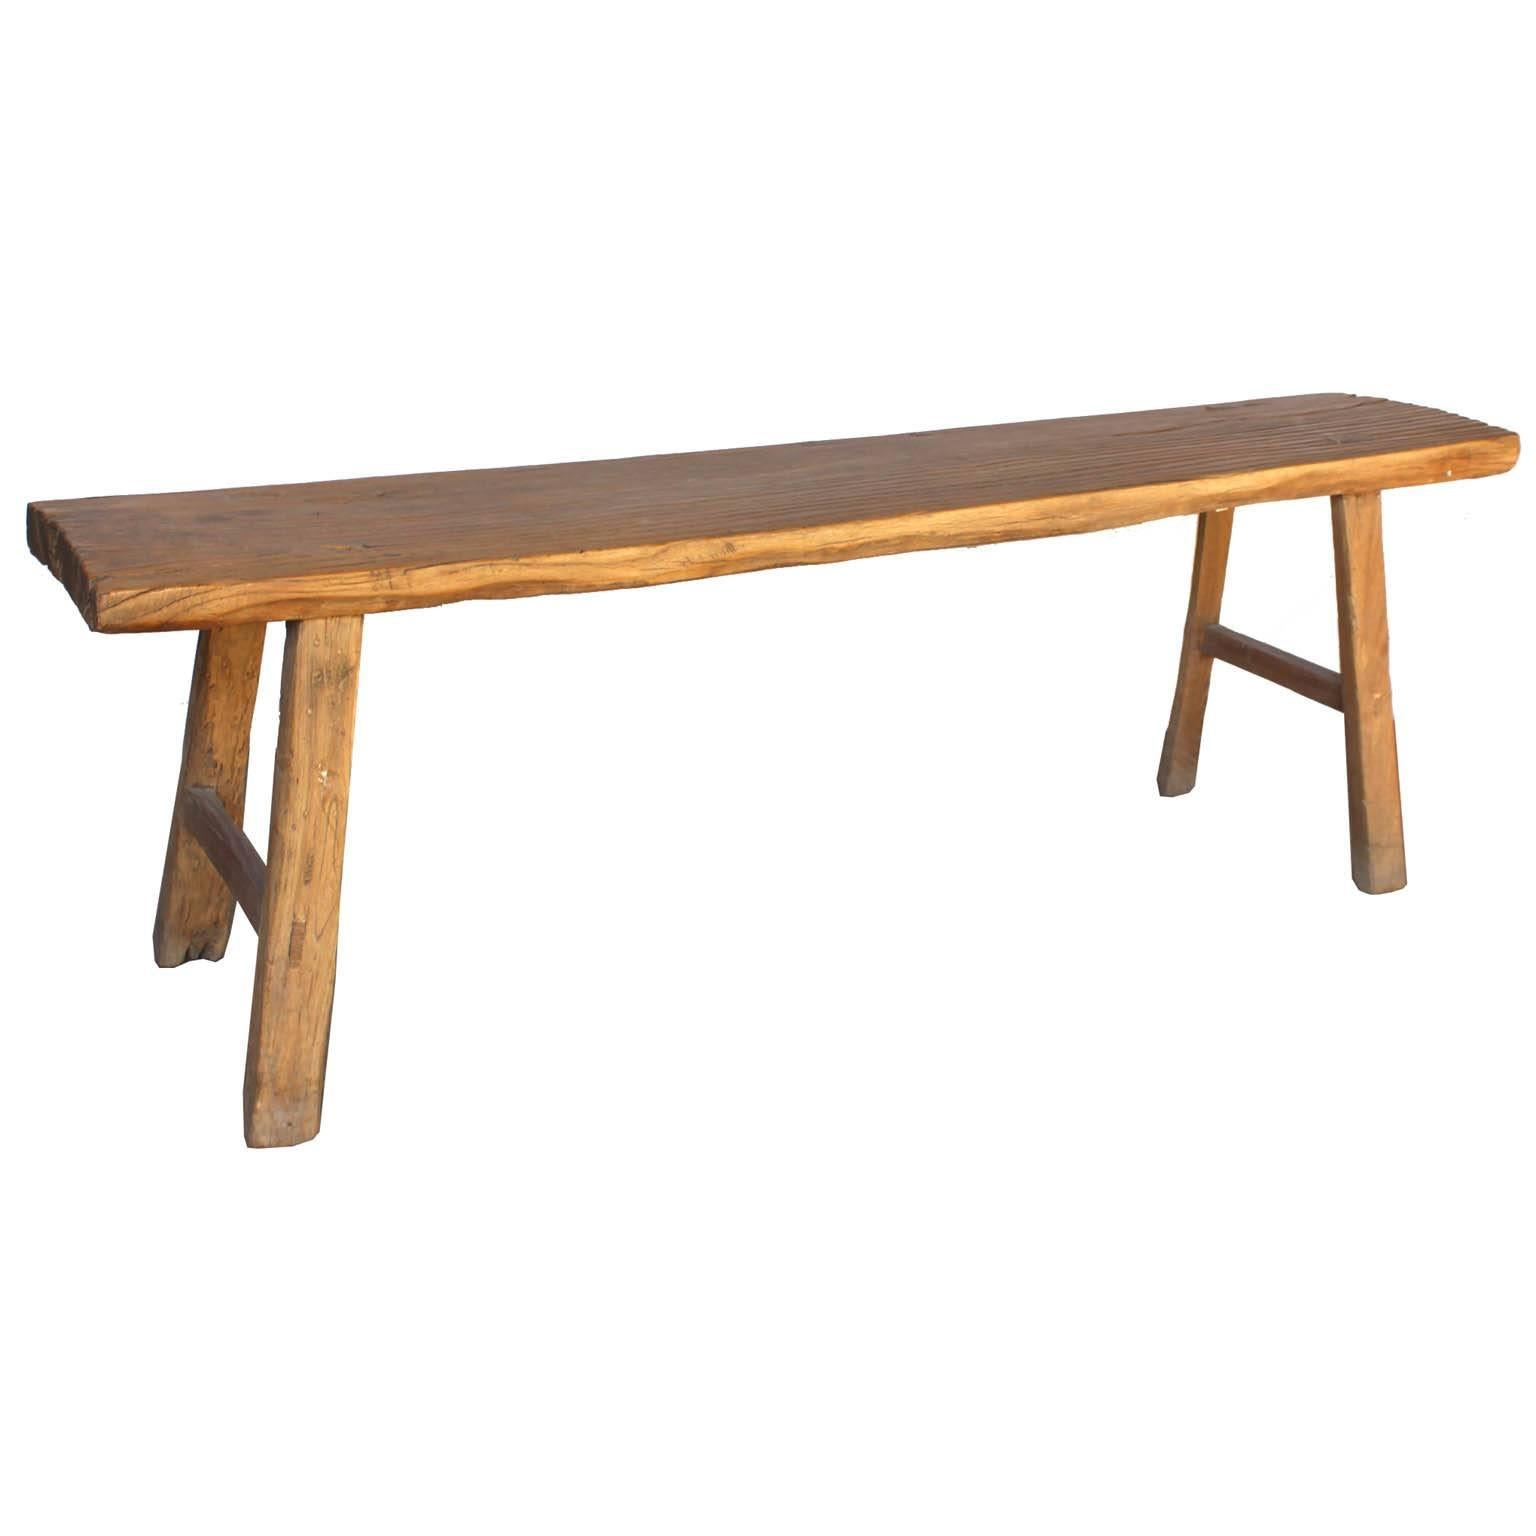 Elmwood bench with side support bars was originally used to practice martial arts. Place at the end of a bed or in the living room for extra seating.